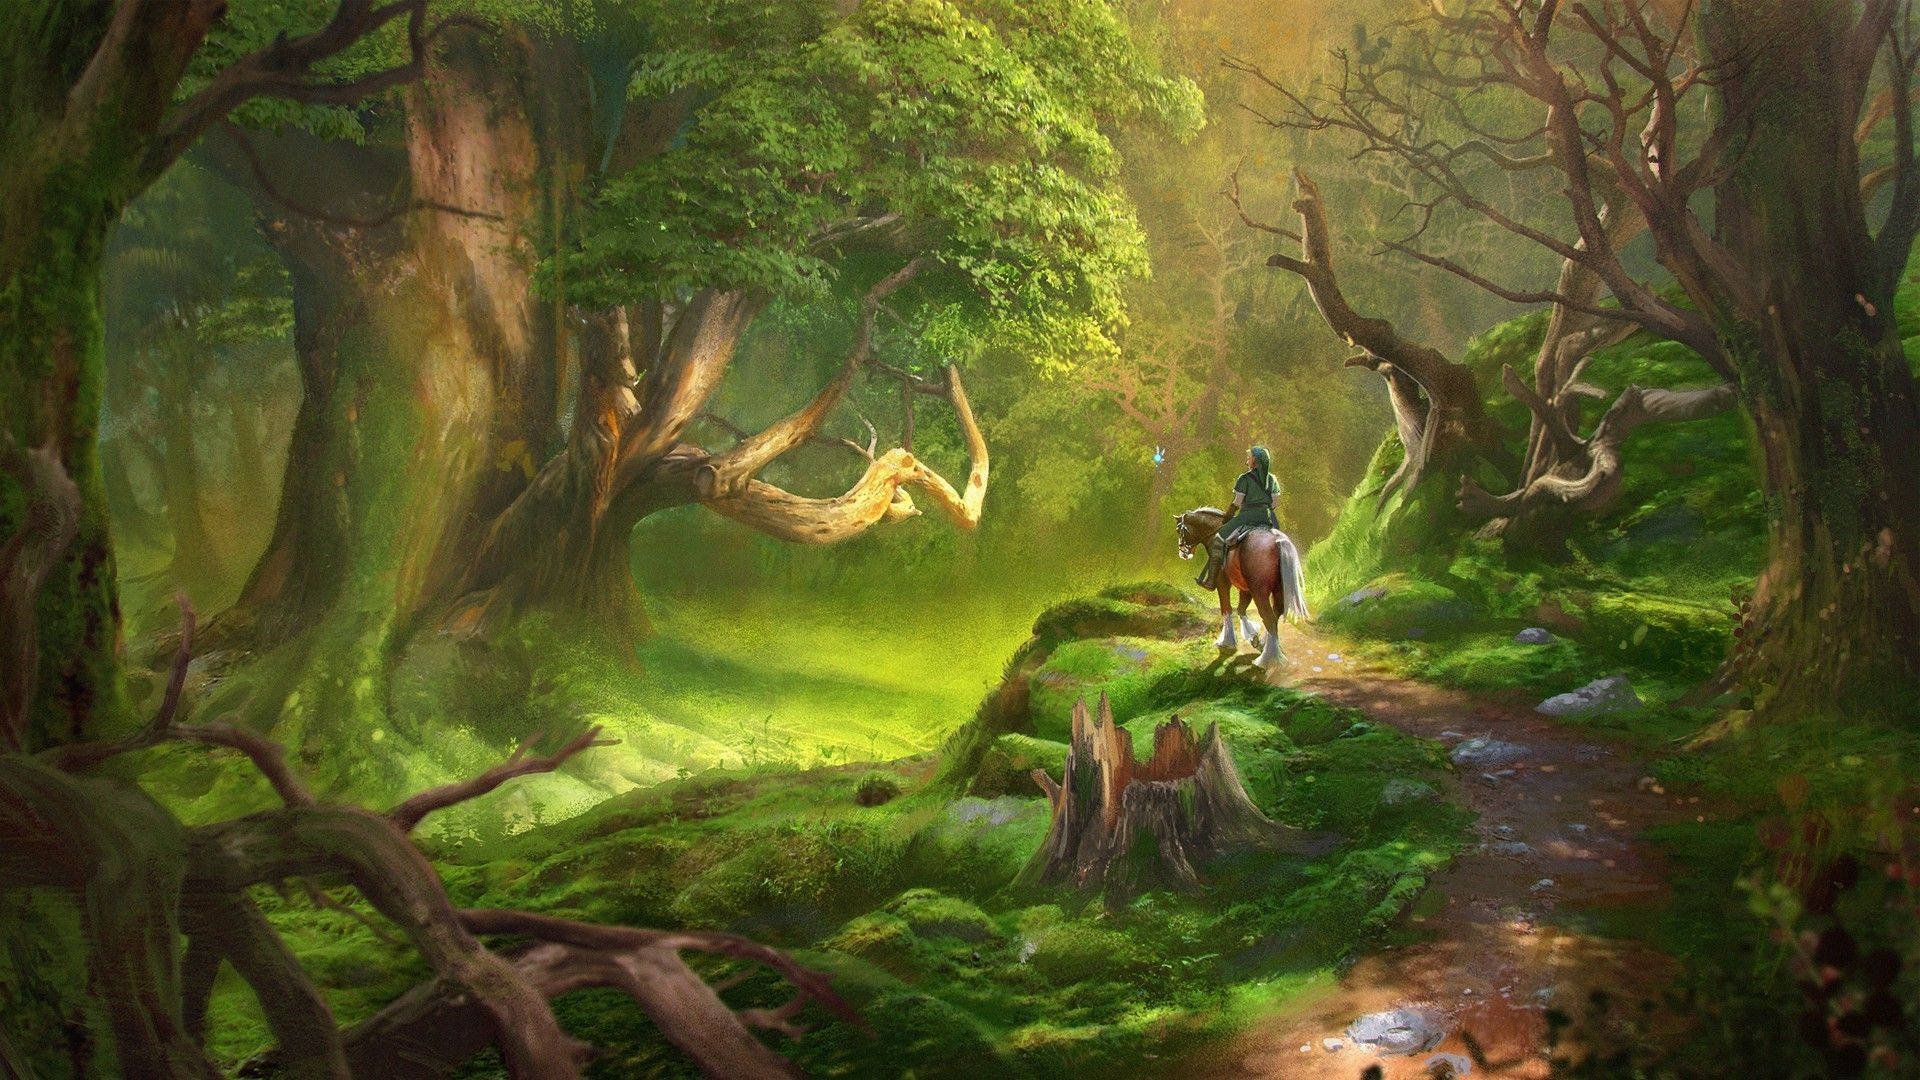 Explore the mystical Forest in The Legend of Zelda Wallpaper